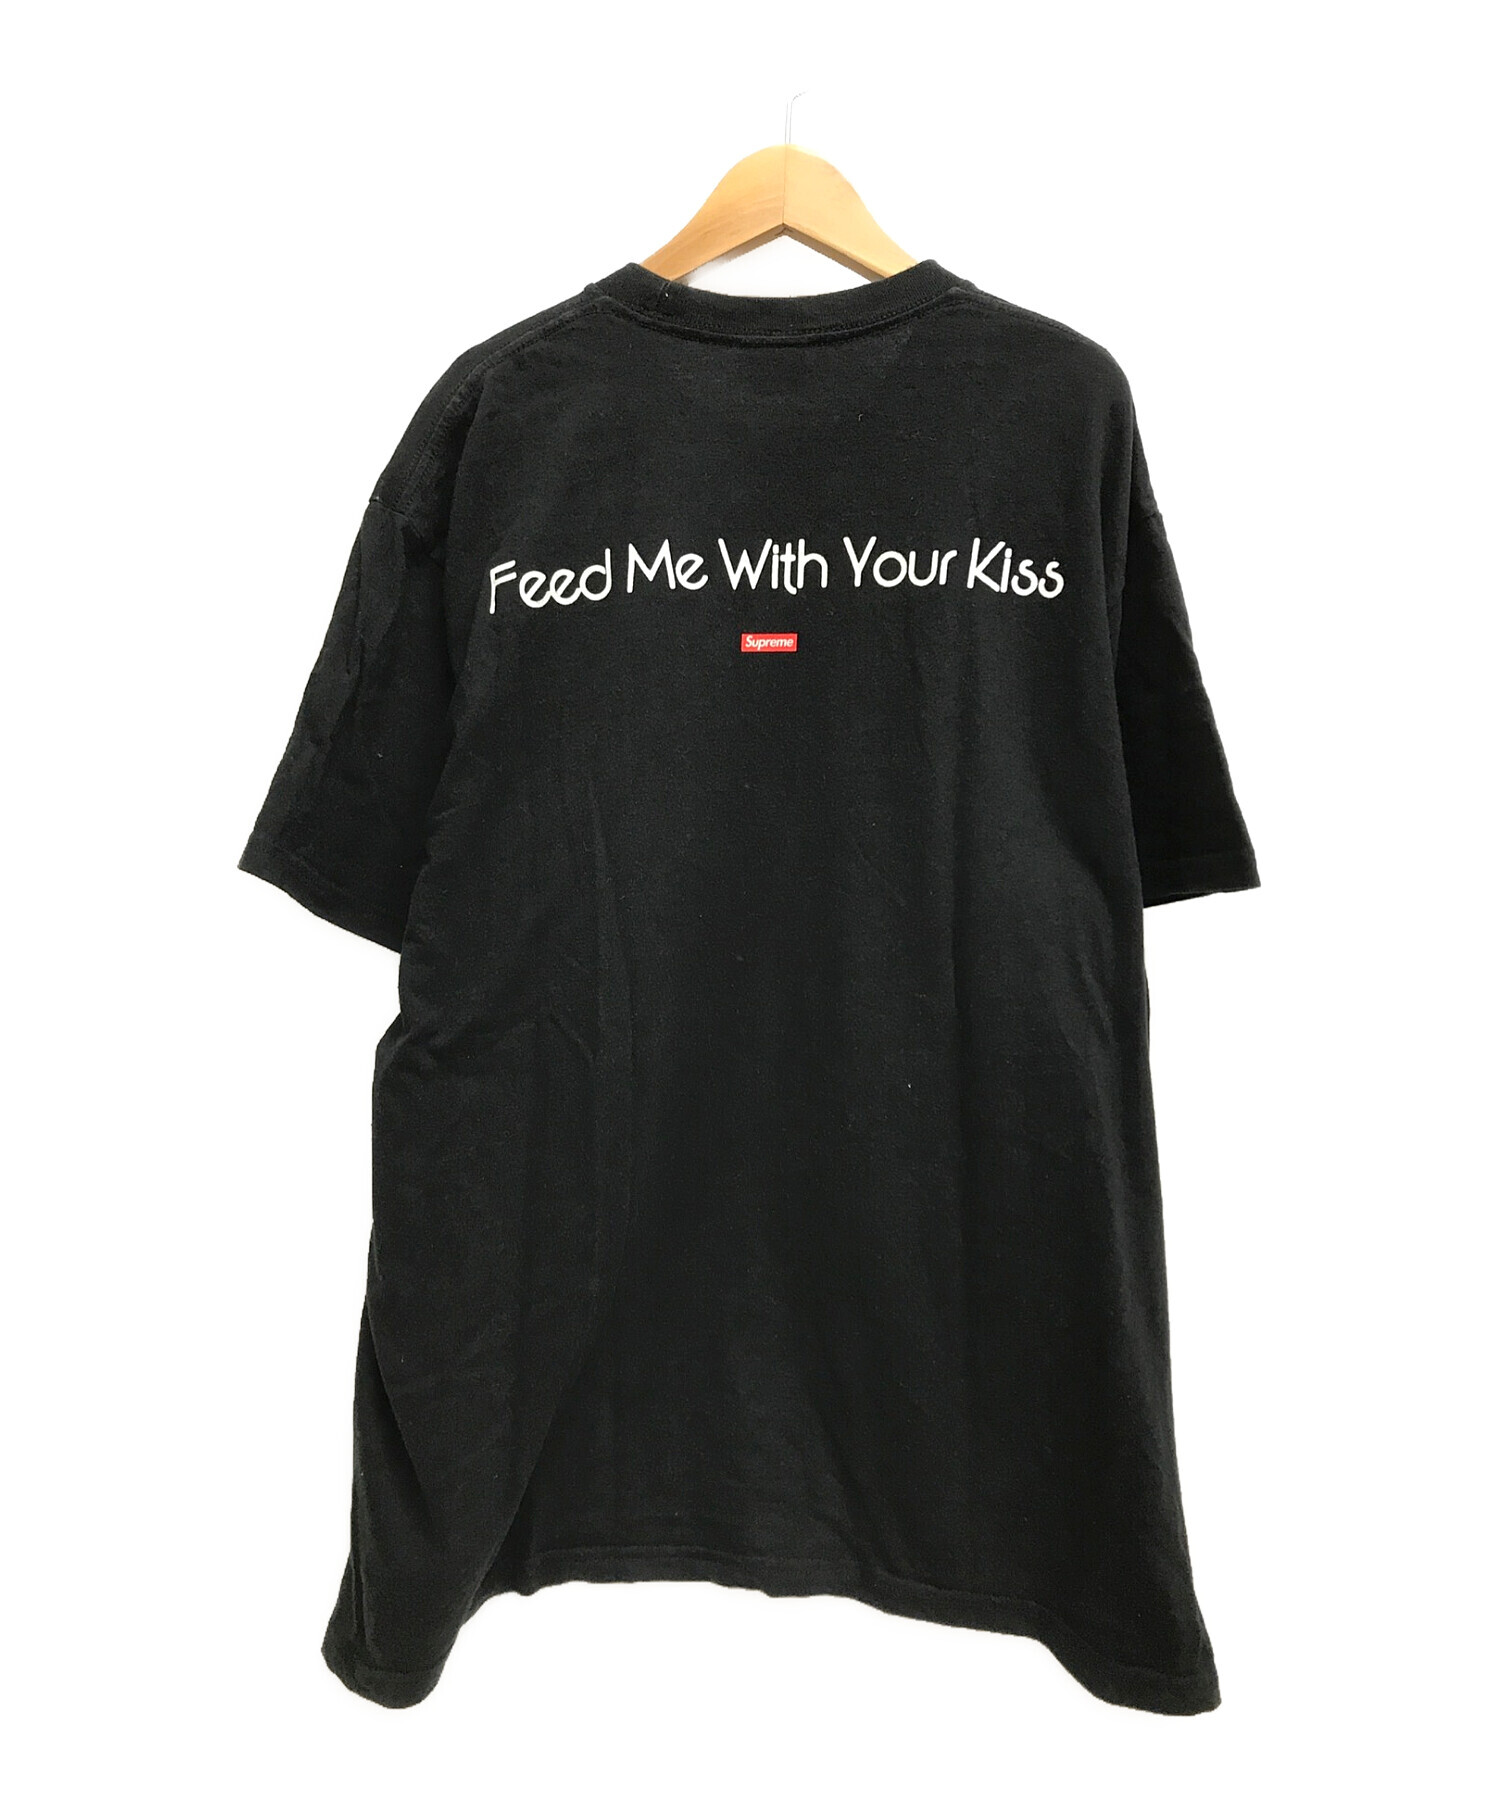 Lサイズ Supreme Feed Me With Your Kiss Tee